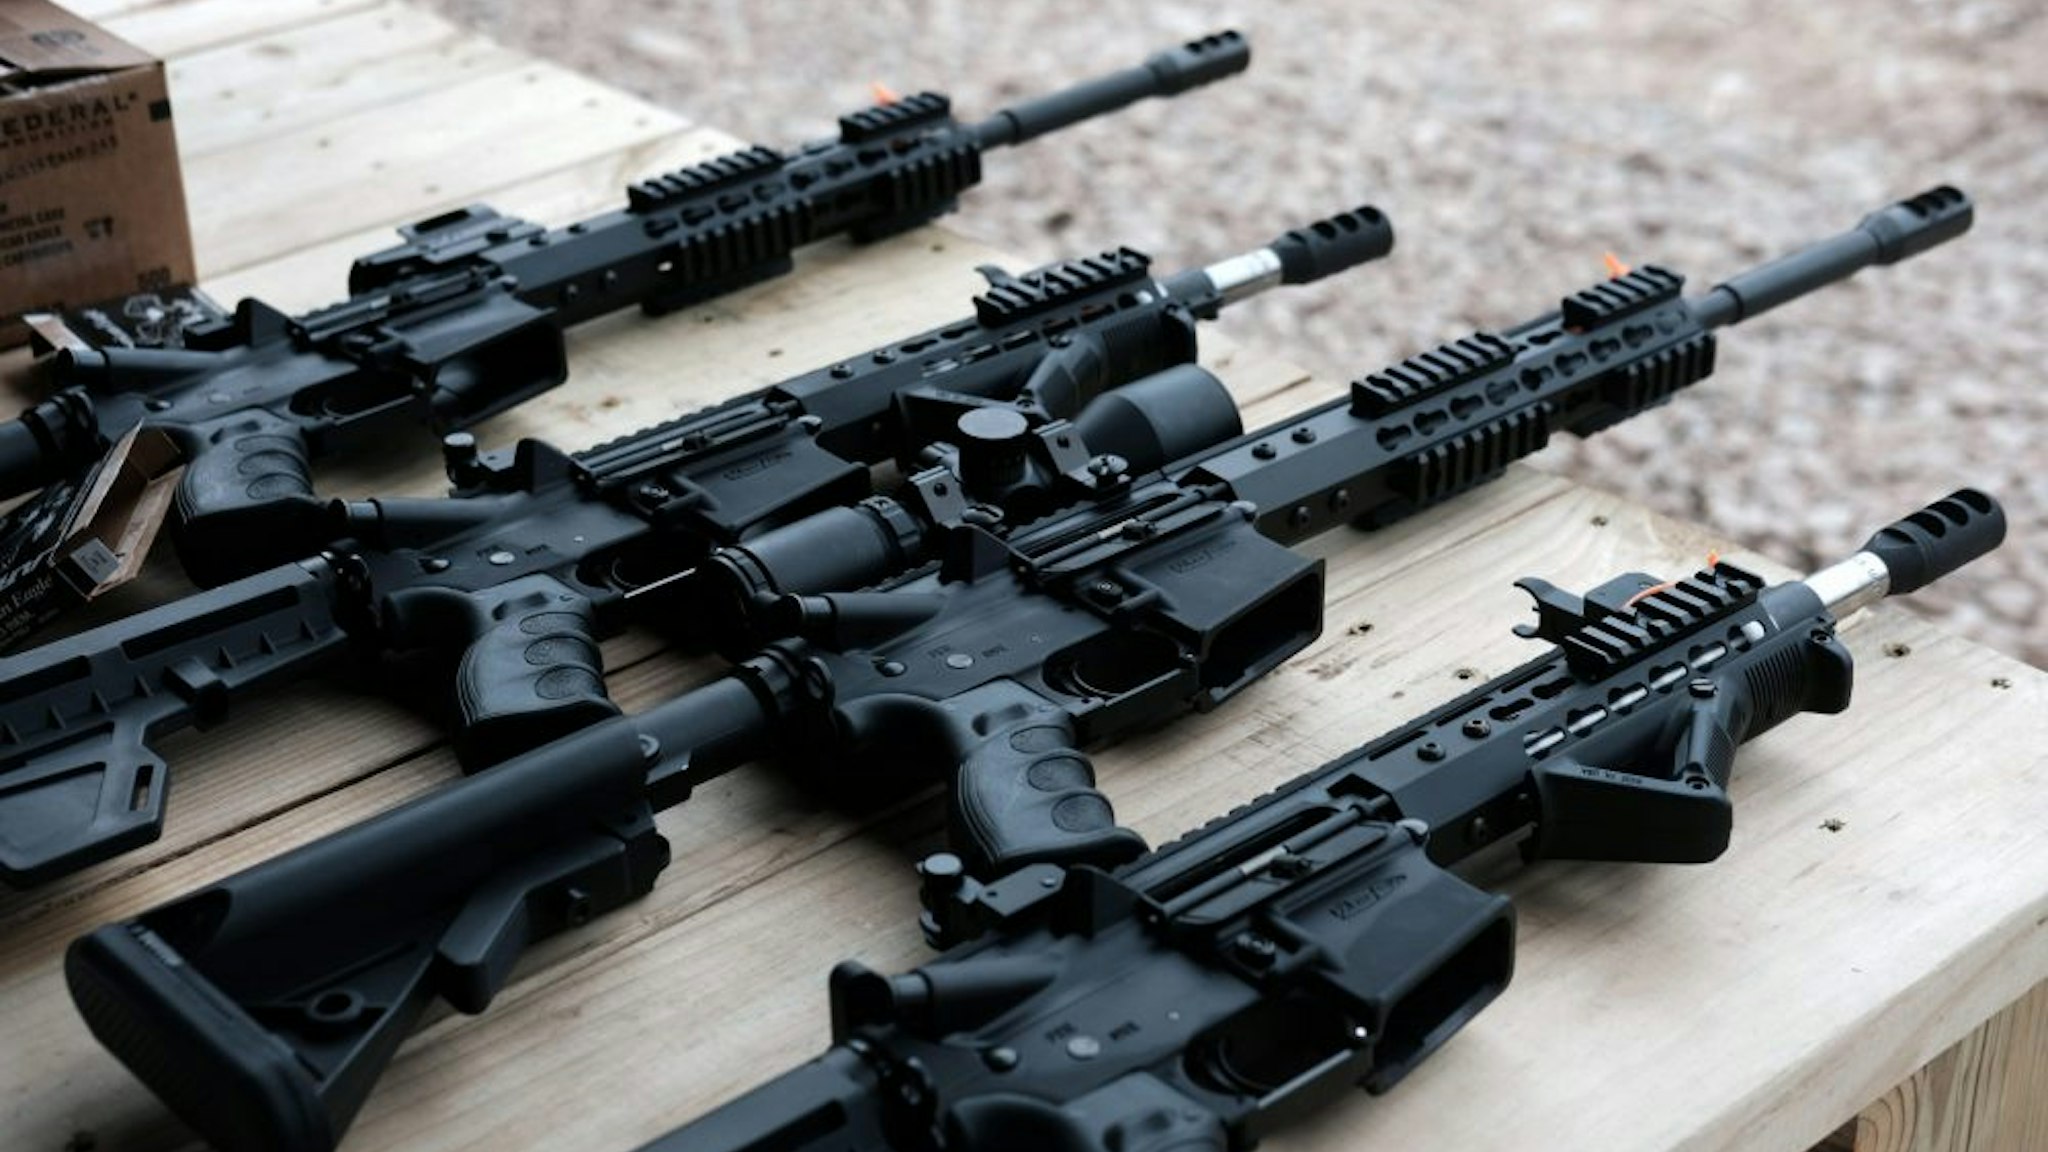 GREELEY, PENNSYLVANIA - OCTOBER 12: AR-15 rifles and other weapons are displayed on a table at a shooting range during the “Rod of Iron Freedom Festival” on October 12, 2019 in Greeley, Pennsylvania. The two-day event, which is organized by Kahr Arms/Tommy Gun Warehouse and Rod of Iron Ministries, has billed itself as a “second amendment rally and celebration of freedom, faith and family.” Numerous speakers, vendors and displays celebrated guns and gun culture in America.